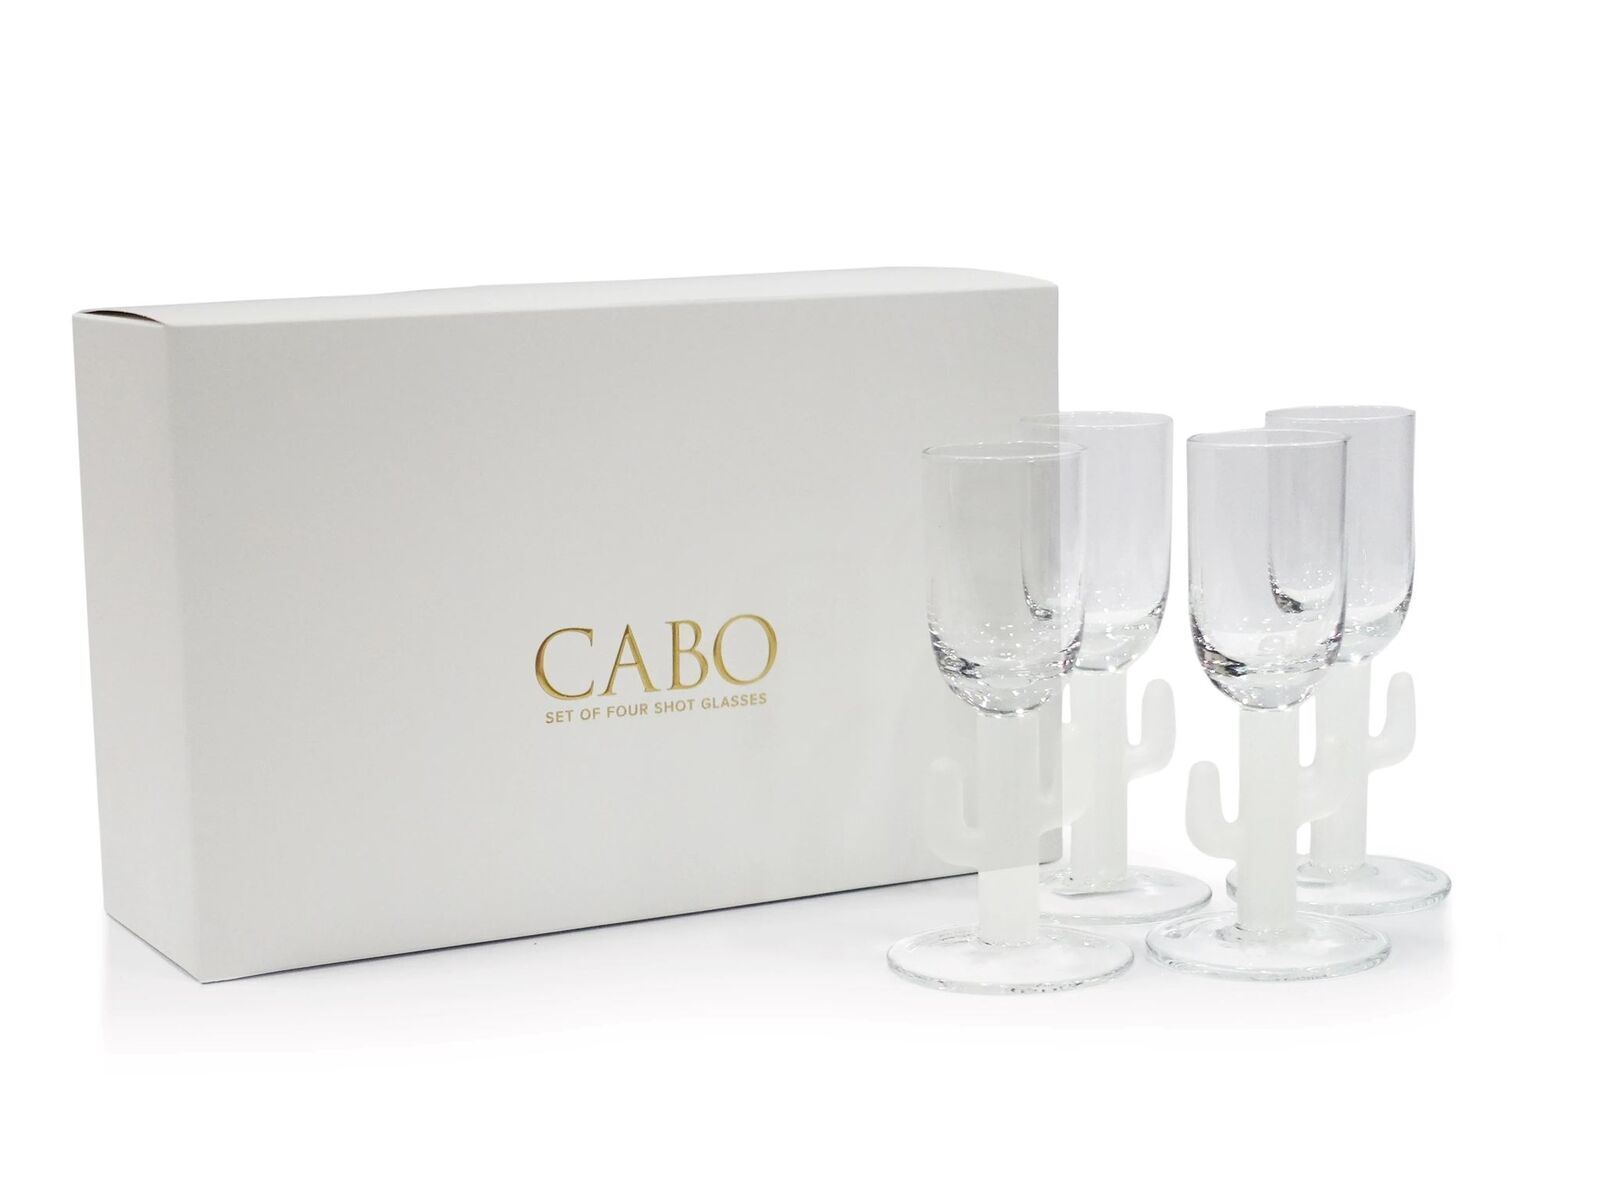 Set of 4 Cabo Cactus Shot Glasses - Frosted in Gift Box